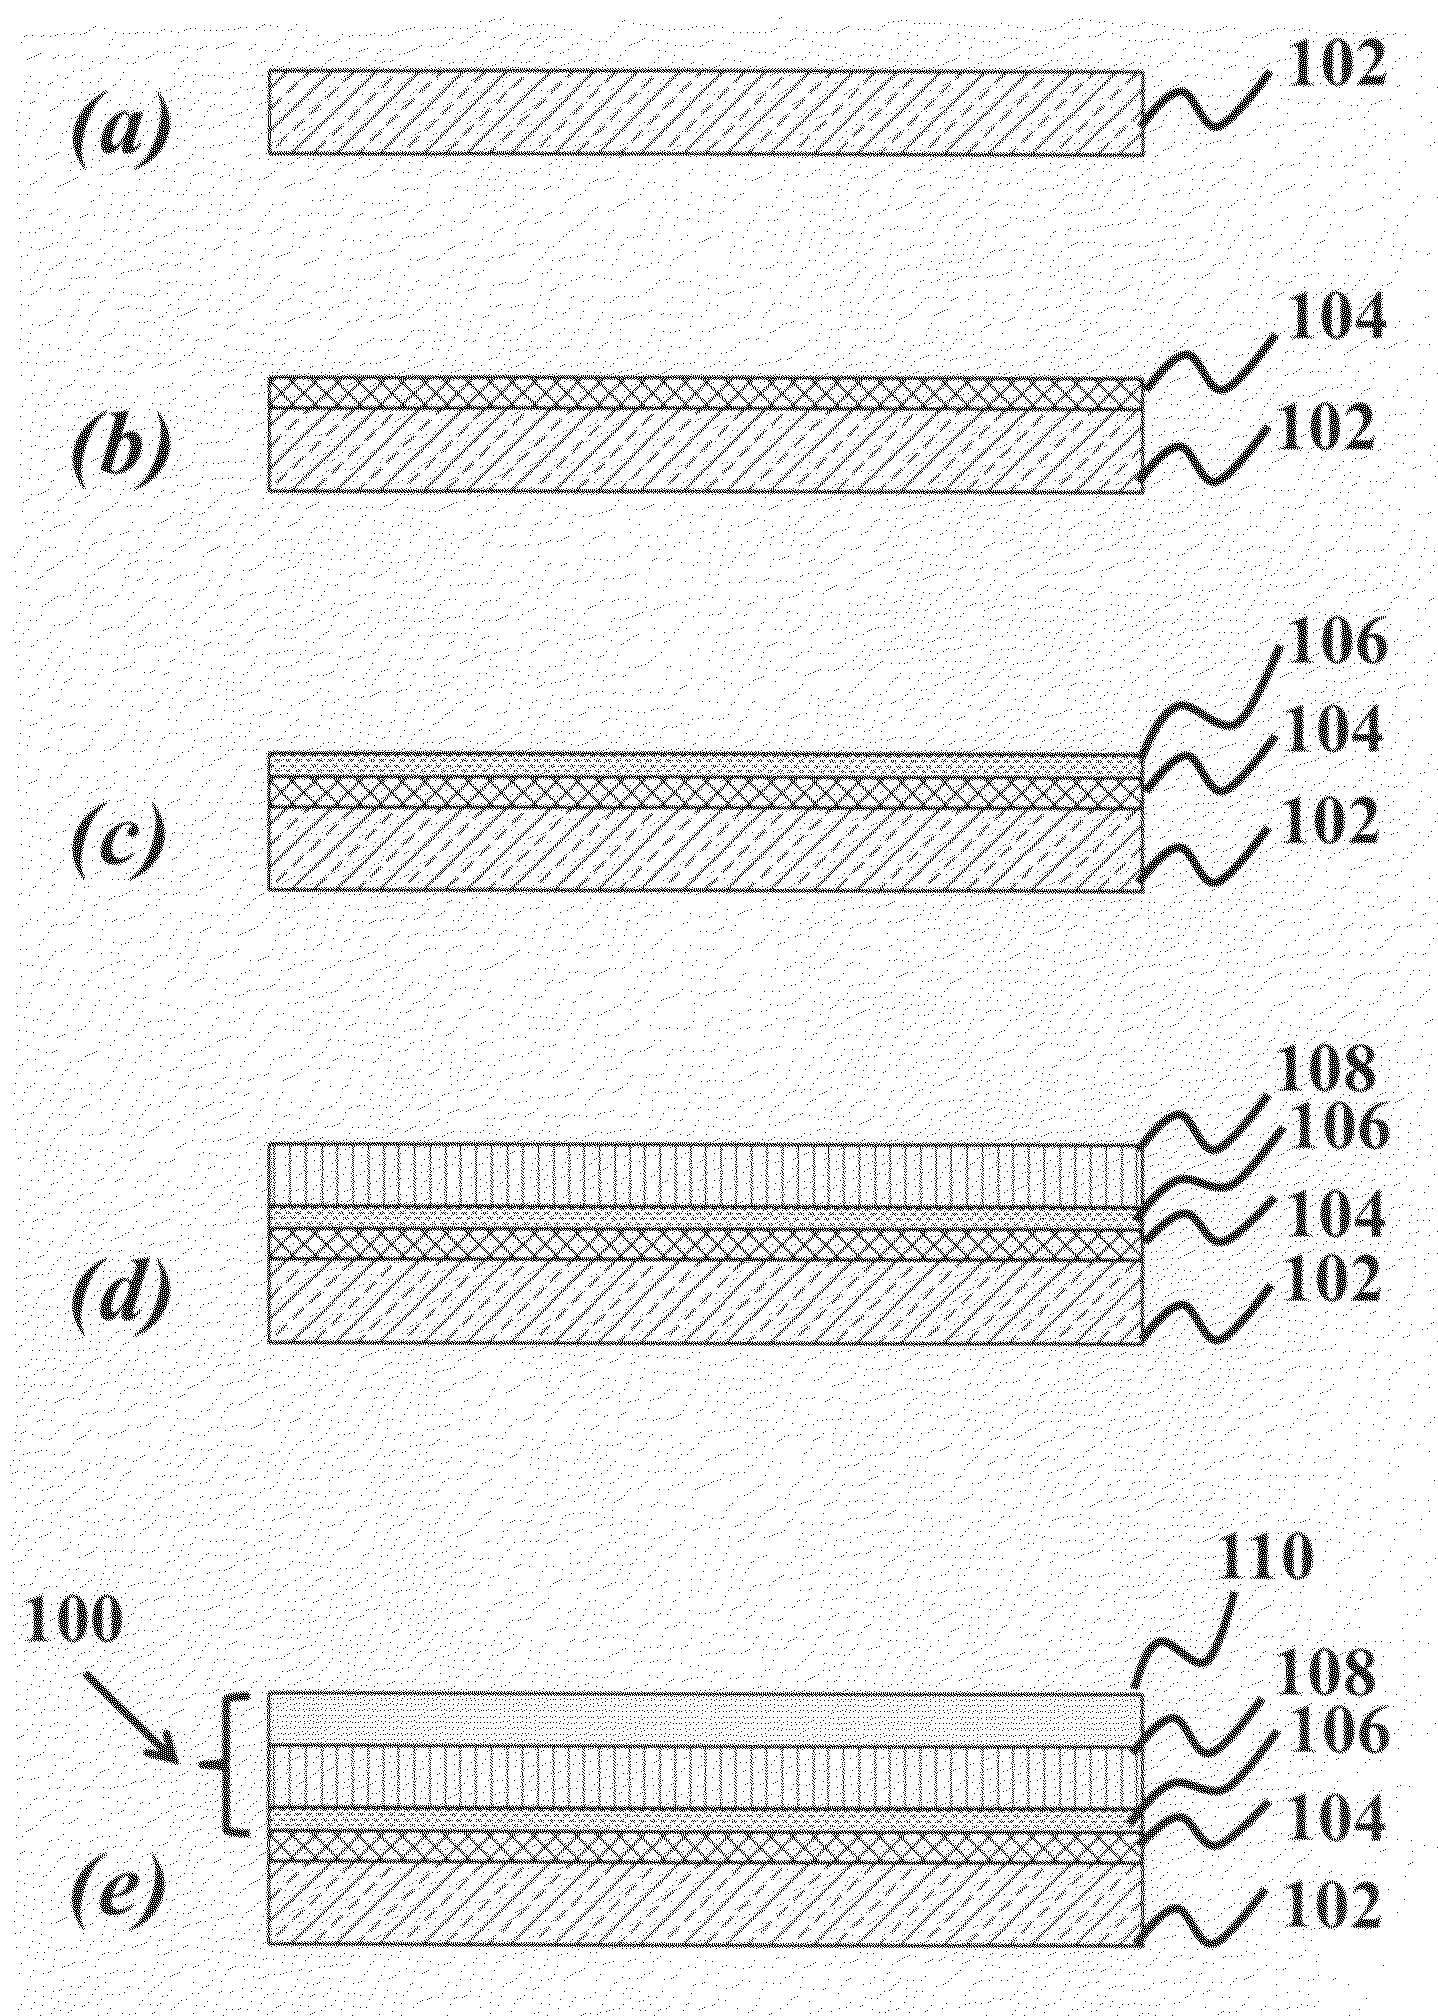 Layer-structured fuel cell catalysts and current collectors